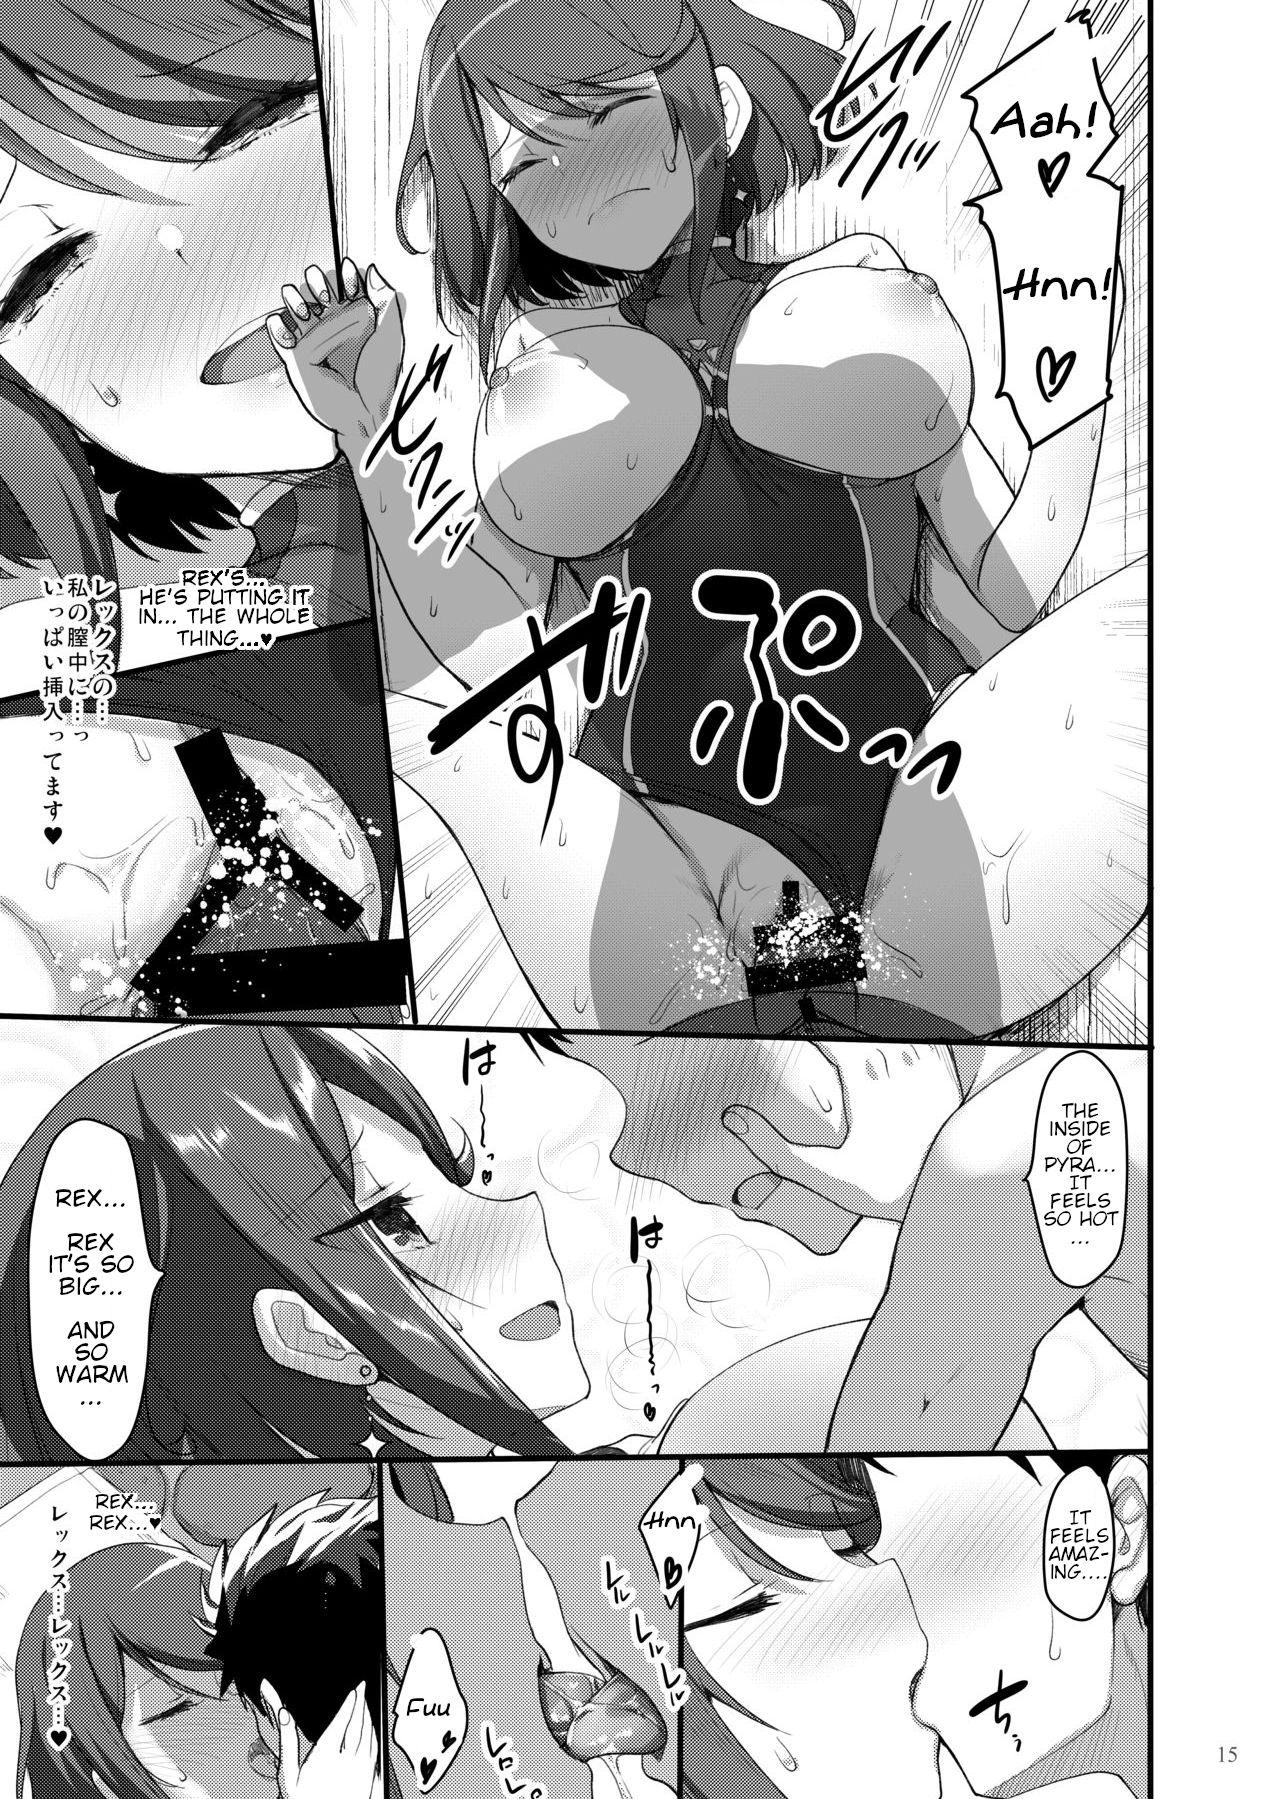 Old Young Mor Ardain's Sweet Night - Superbia no Amai Yoru - Xenoblade chronicles 2 Gaysex - Page 13